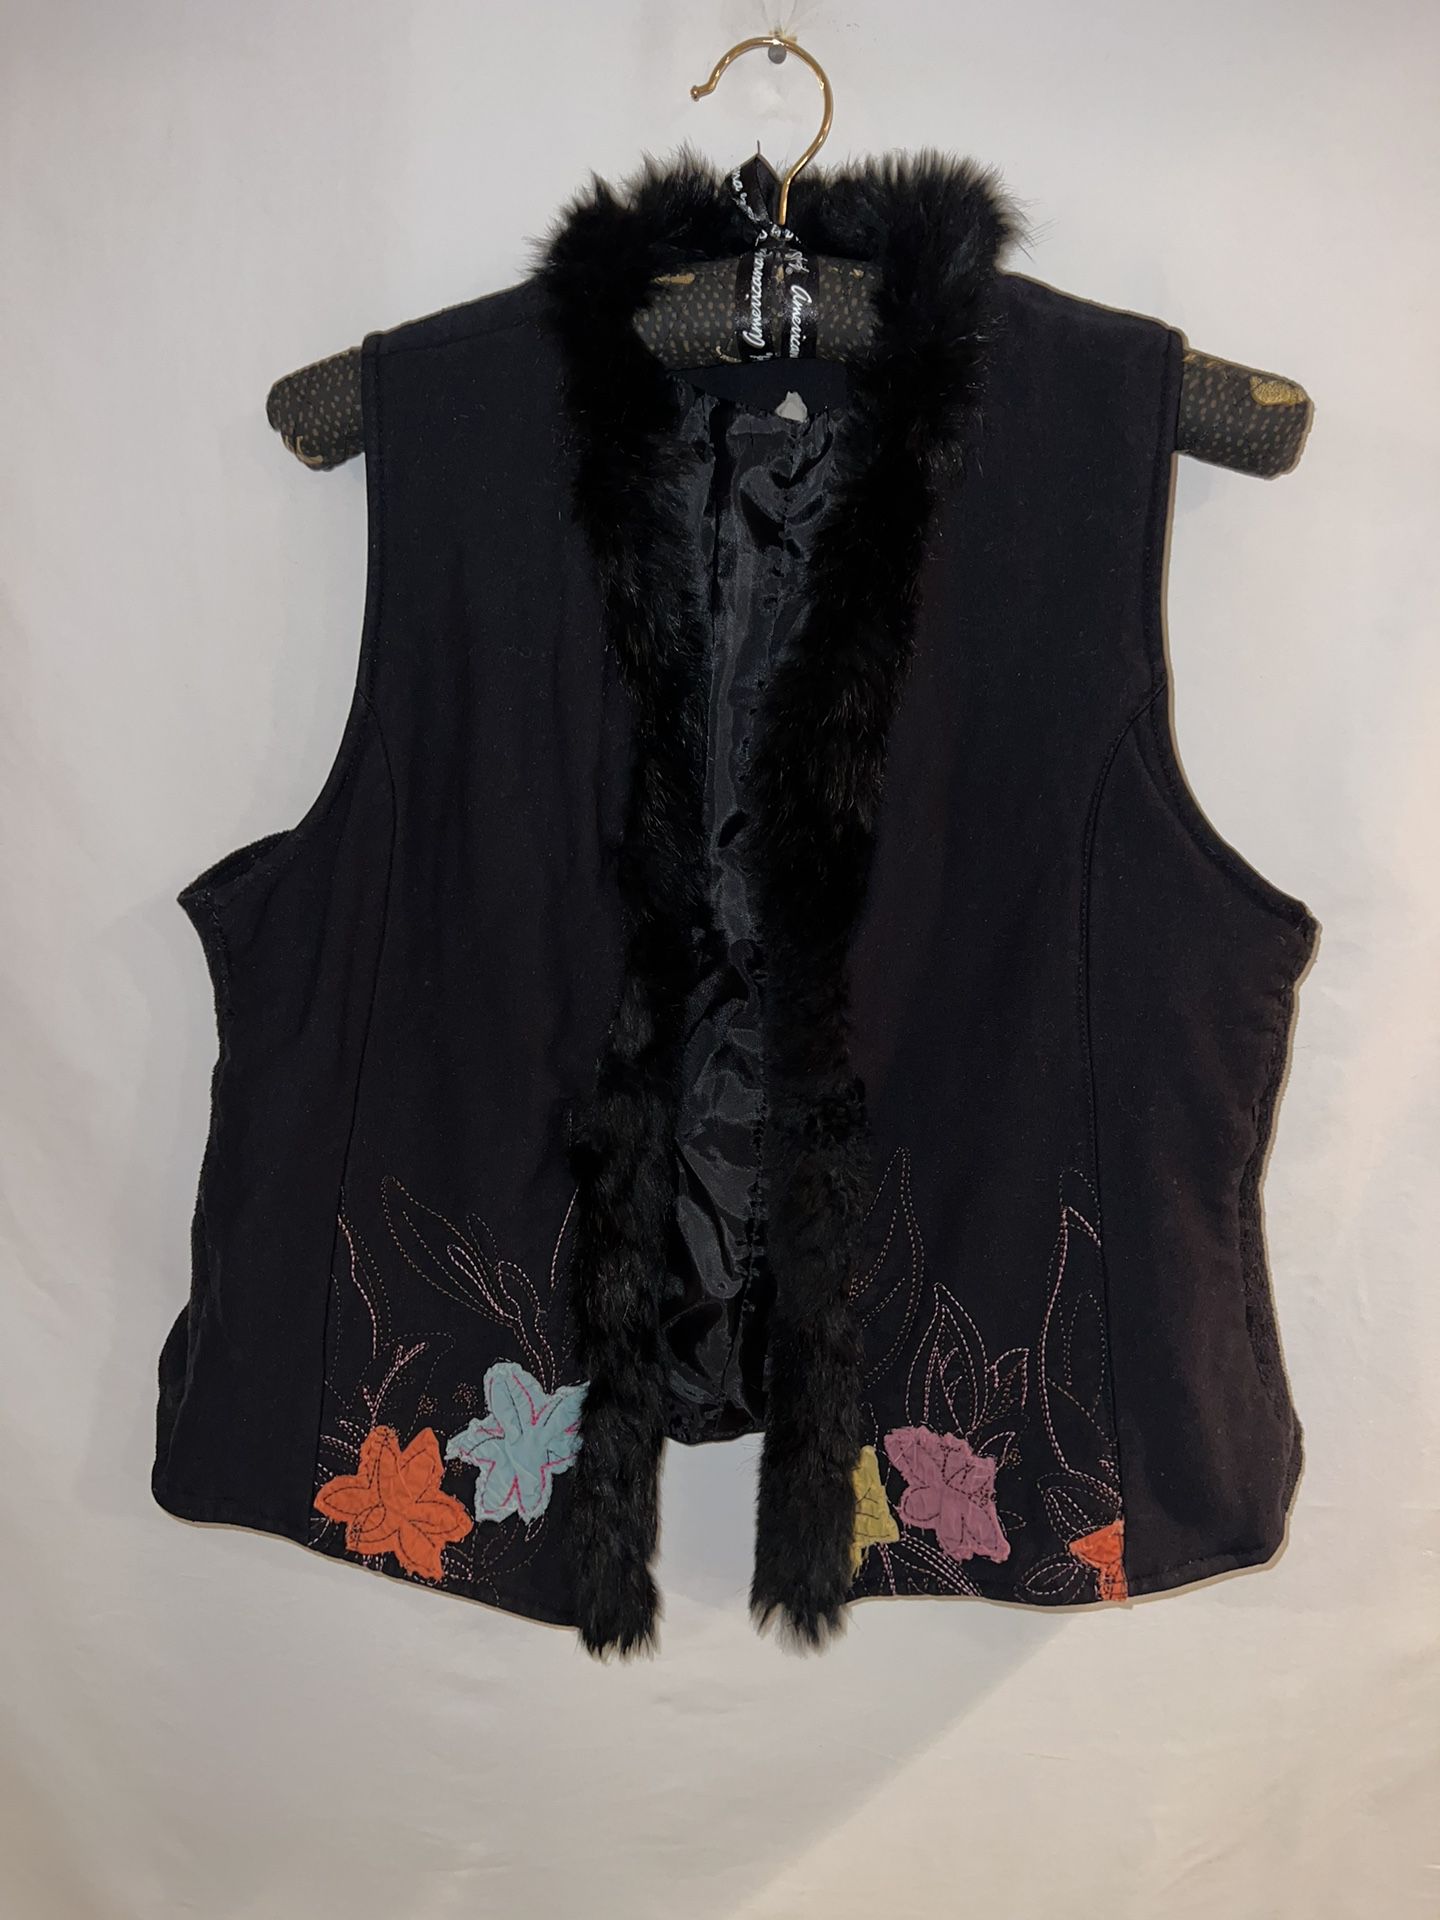 Ladies size Small adorable floral embroidered accents suede & fur vest 